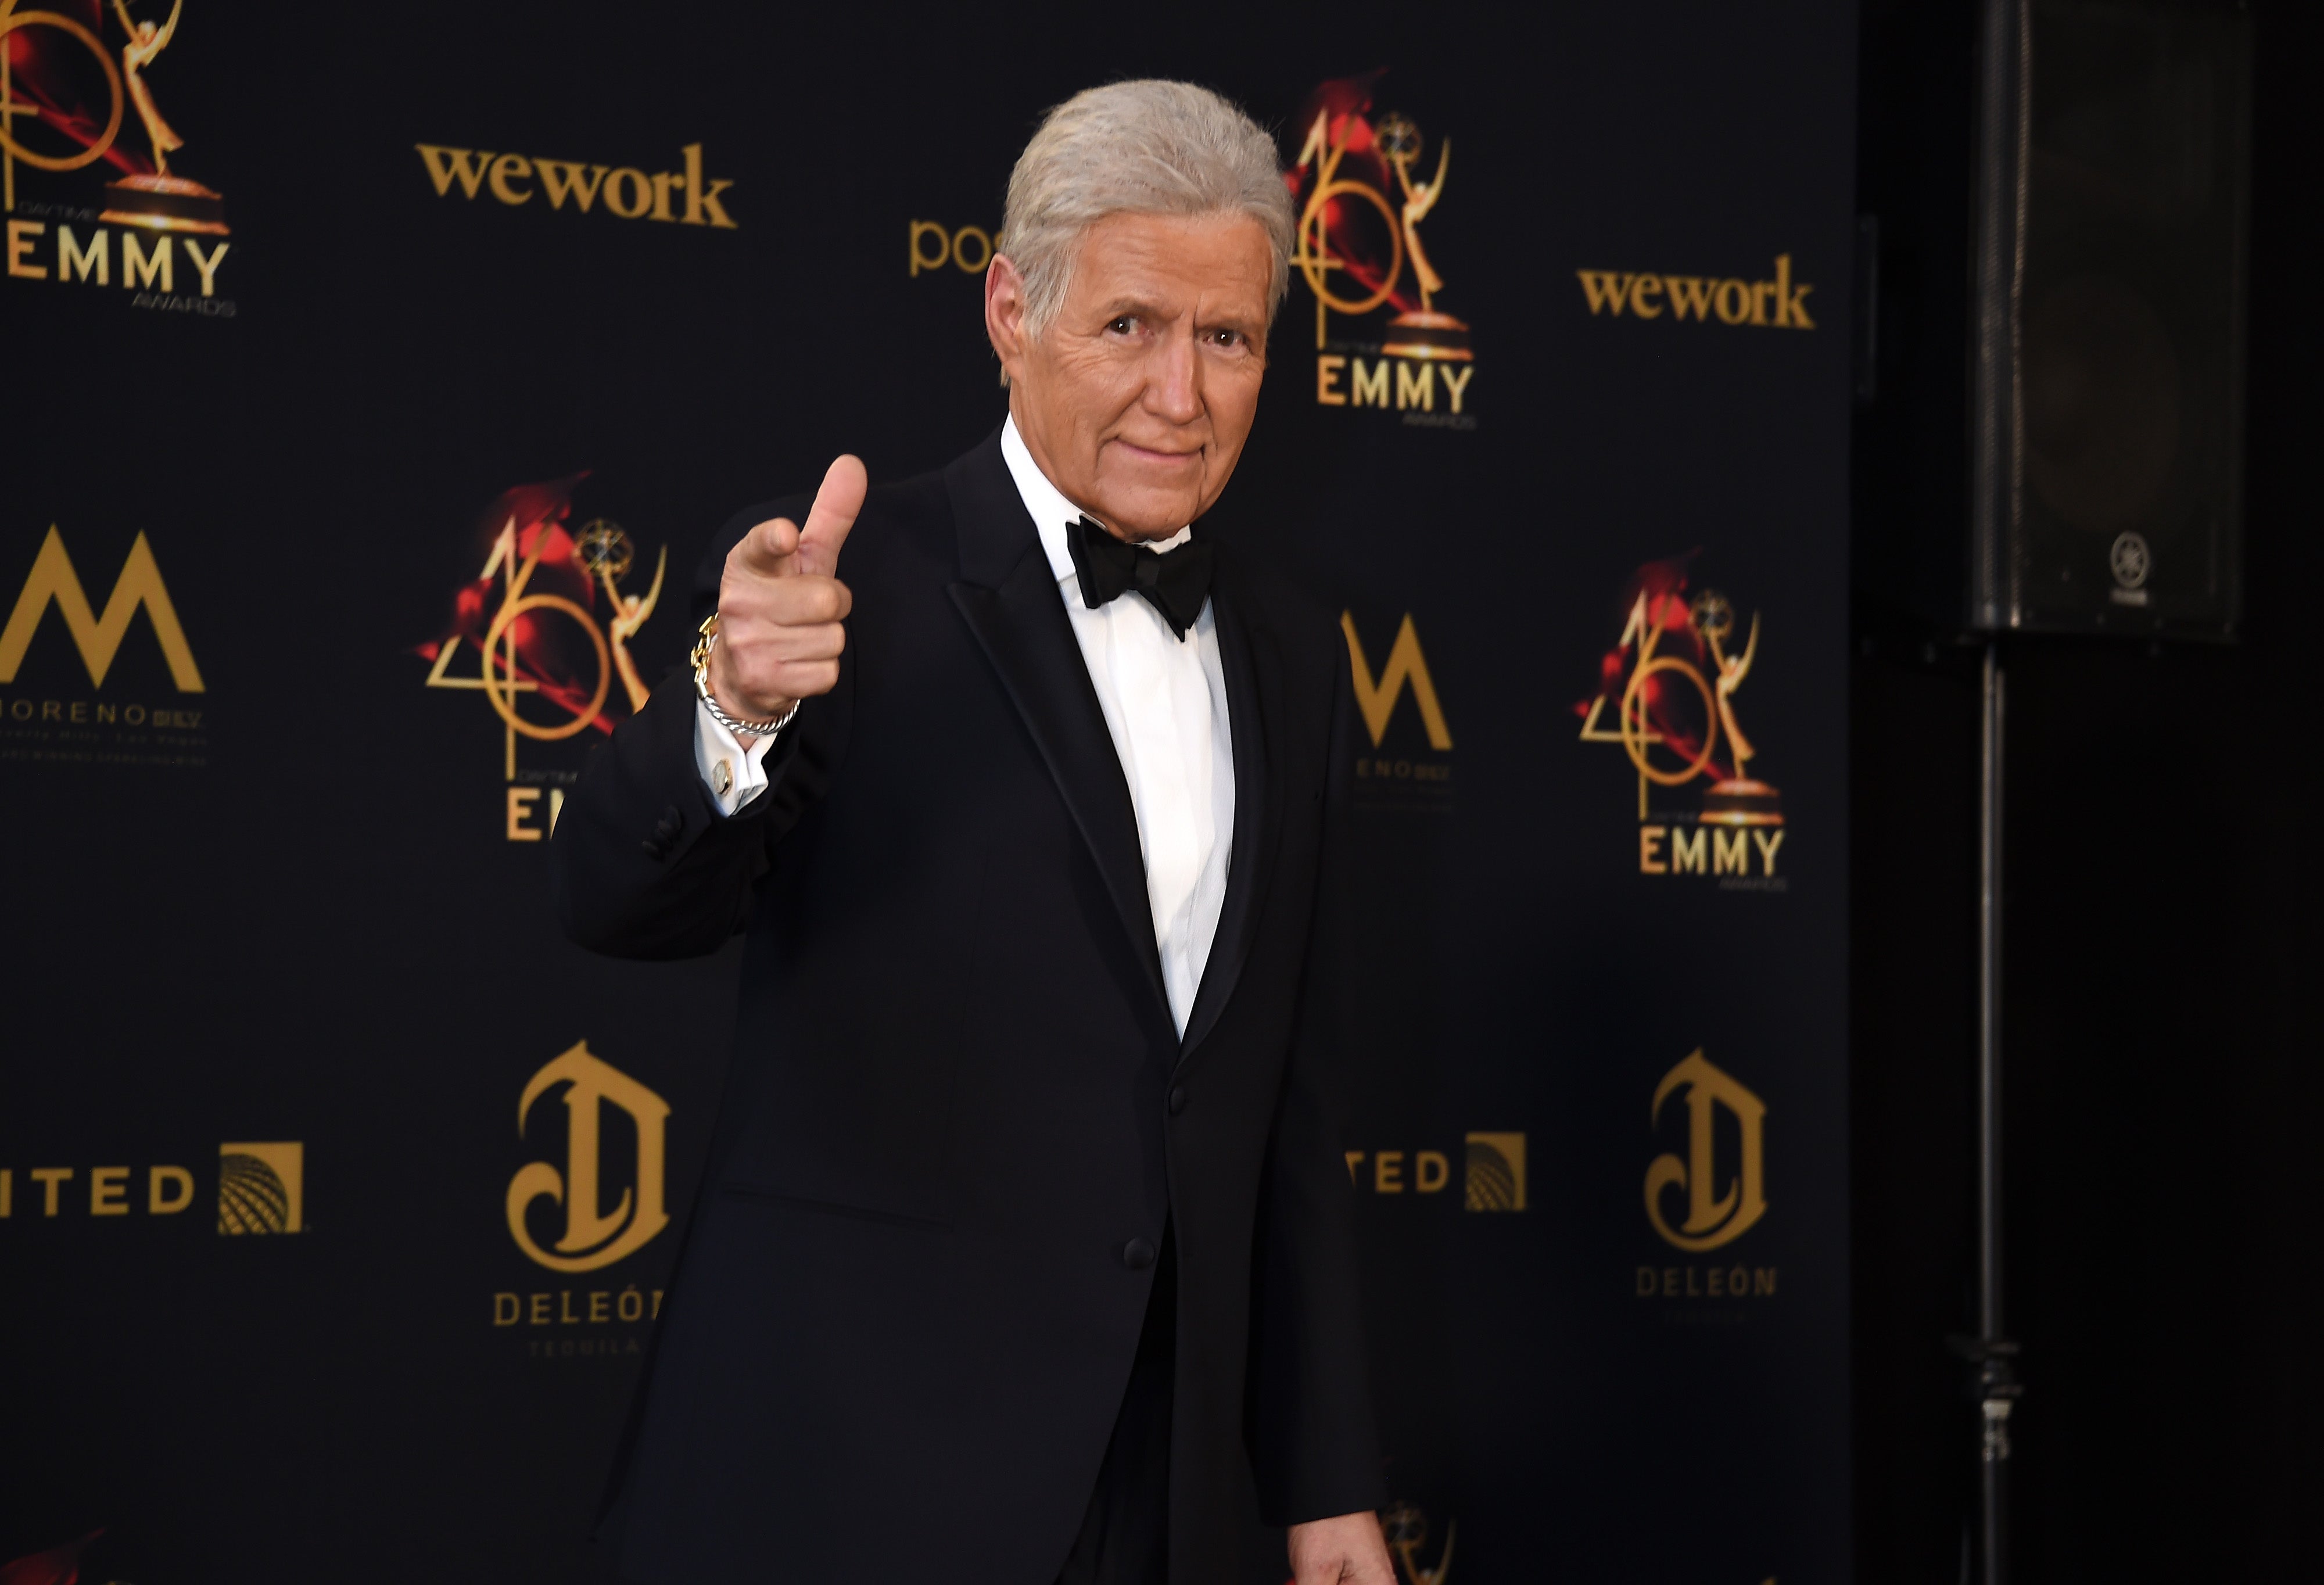 Alex Trebek poses in the press room during the 46th annual Daytime Emmy Awards at Pasadena Civic Center on 5 May 2019 in Pasadena, California